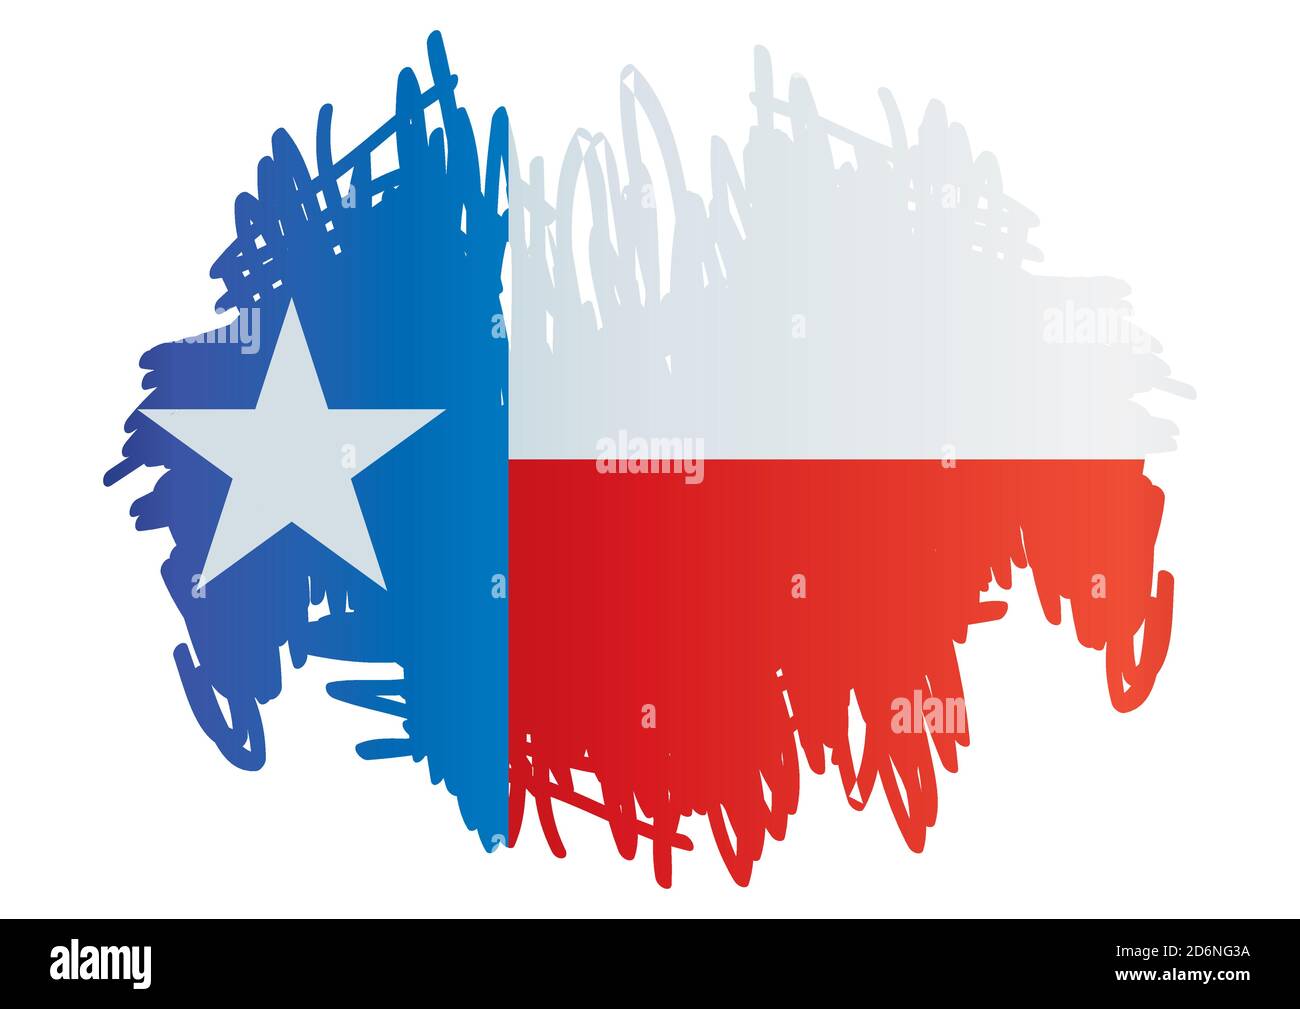 flag-of-texas-state-of-texas-bright-colorful-vector-illustration